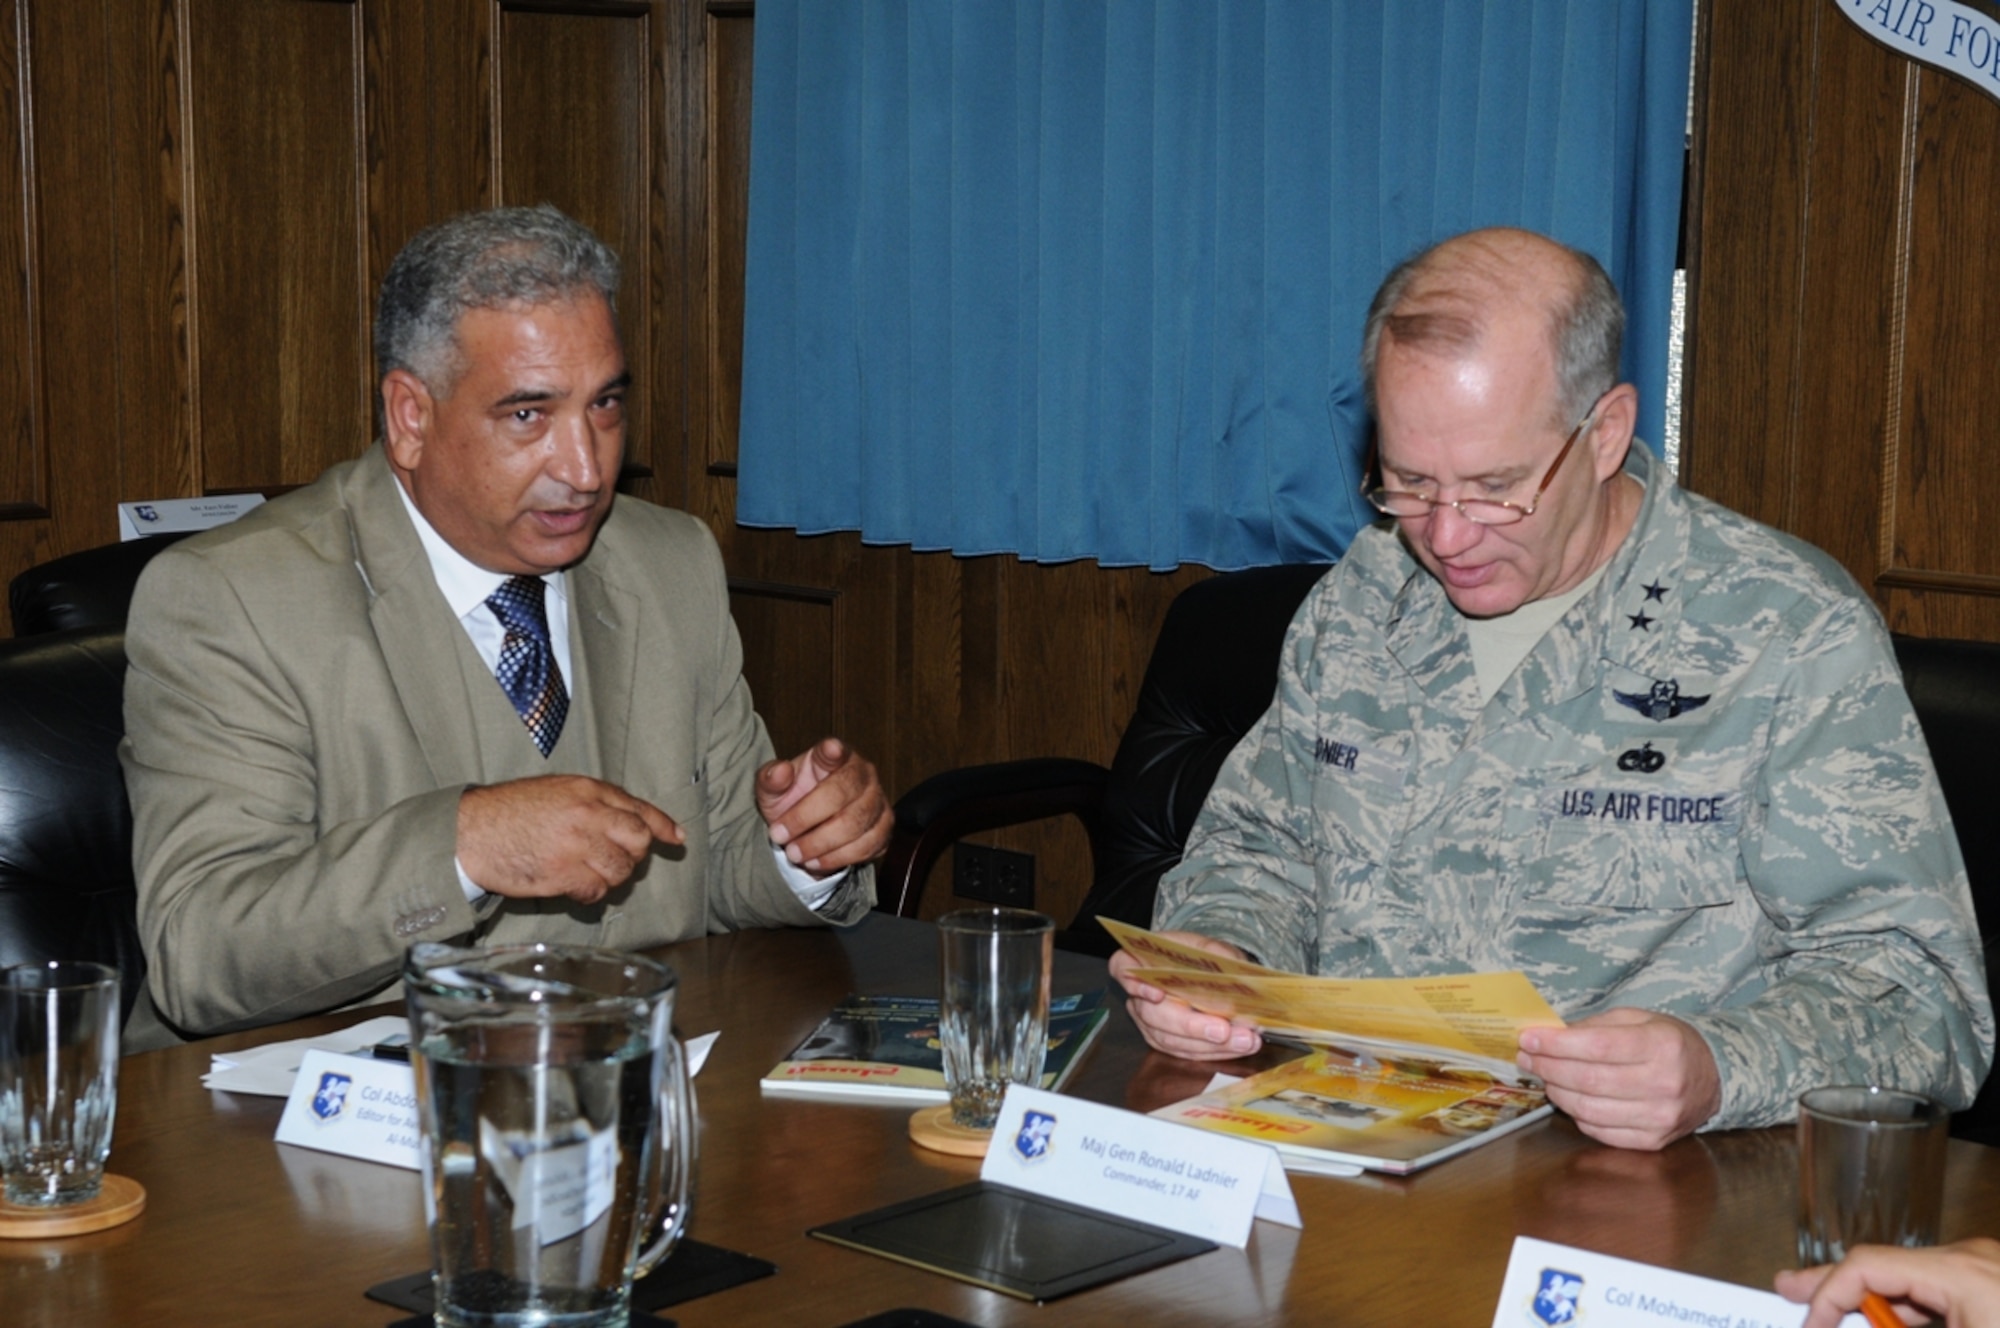 RAMSTEIN AIR BASE, Germany -- Lt. Col. Mohamed Abdulghani, an editor with Al Musaahl, a Libyan Defense Magazine, shows a copy of the publication to 17th Air Force Commander Maj. Gen. Ron Ladnier during a Libyan military media delegation visit to 17th's Ramstein HQ Sept. 23. (USAF photo by Maj. Paula Kurtz)